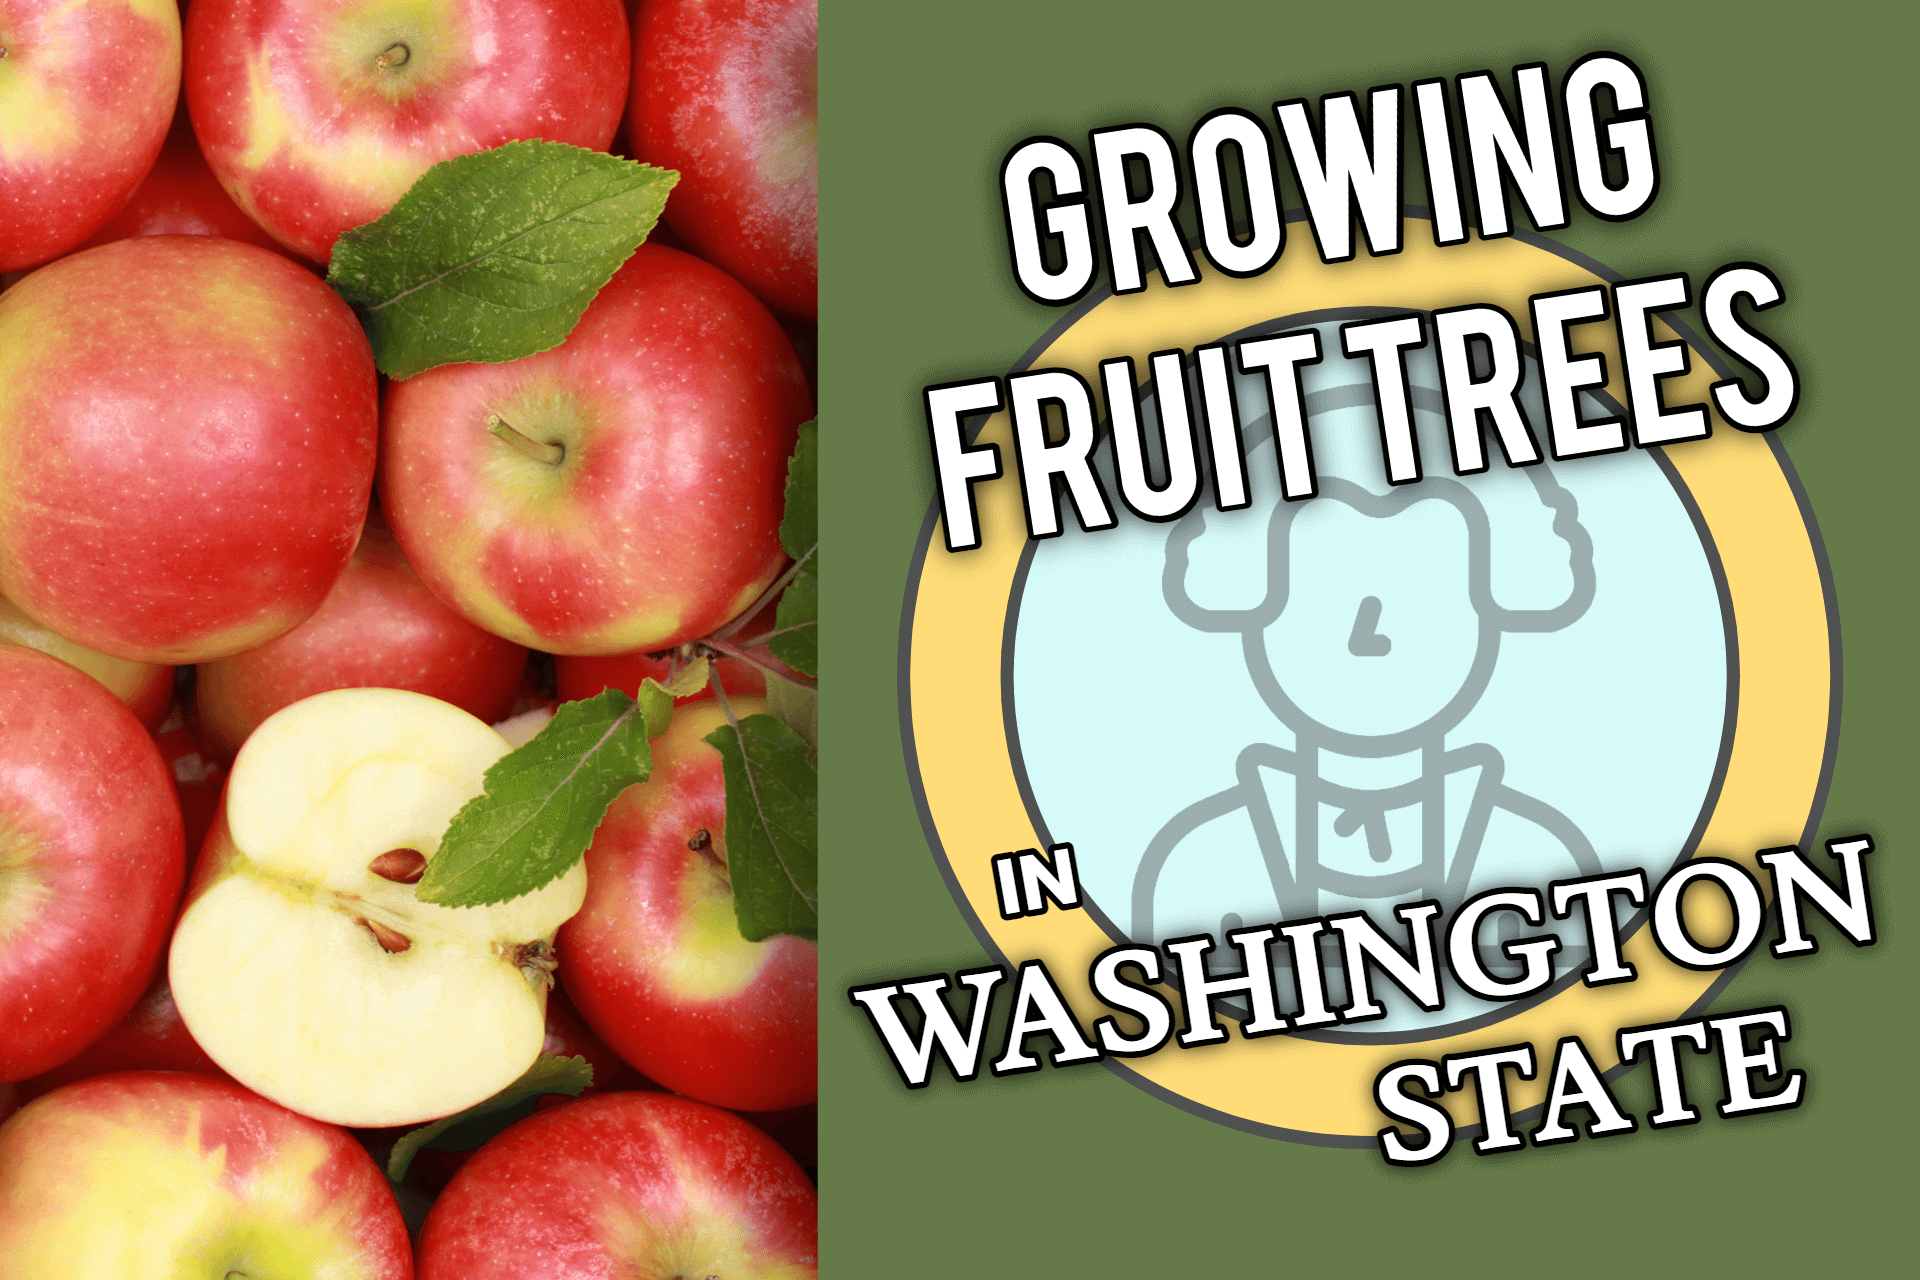 What Fruit Trees Can I grow In Washington?